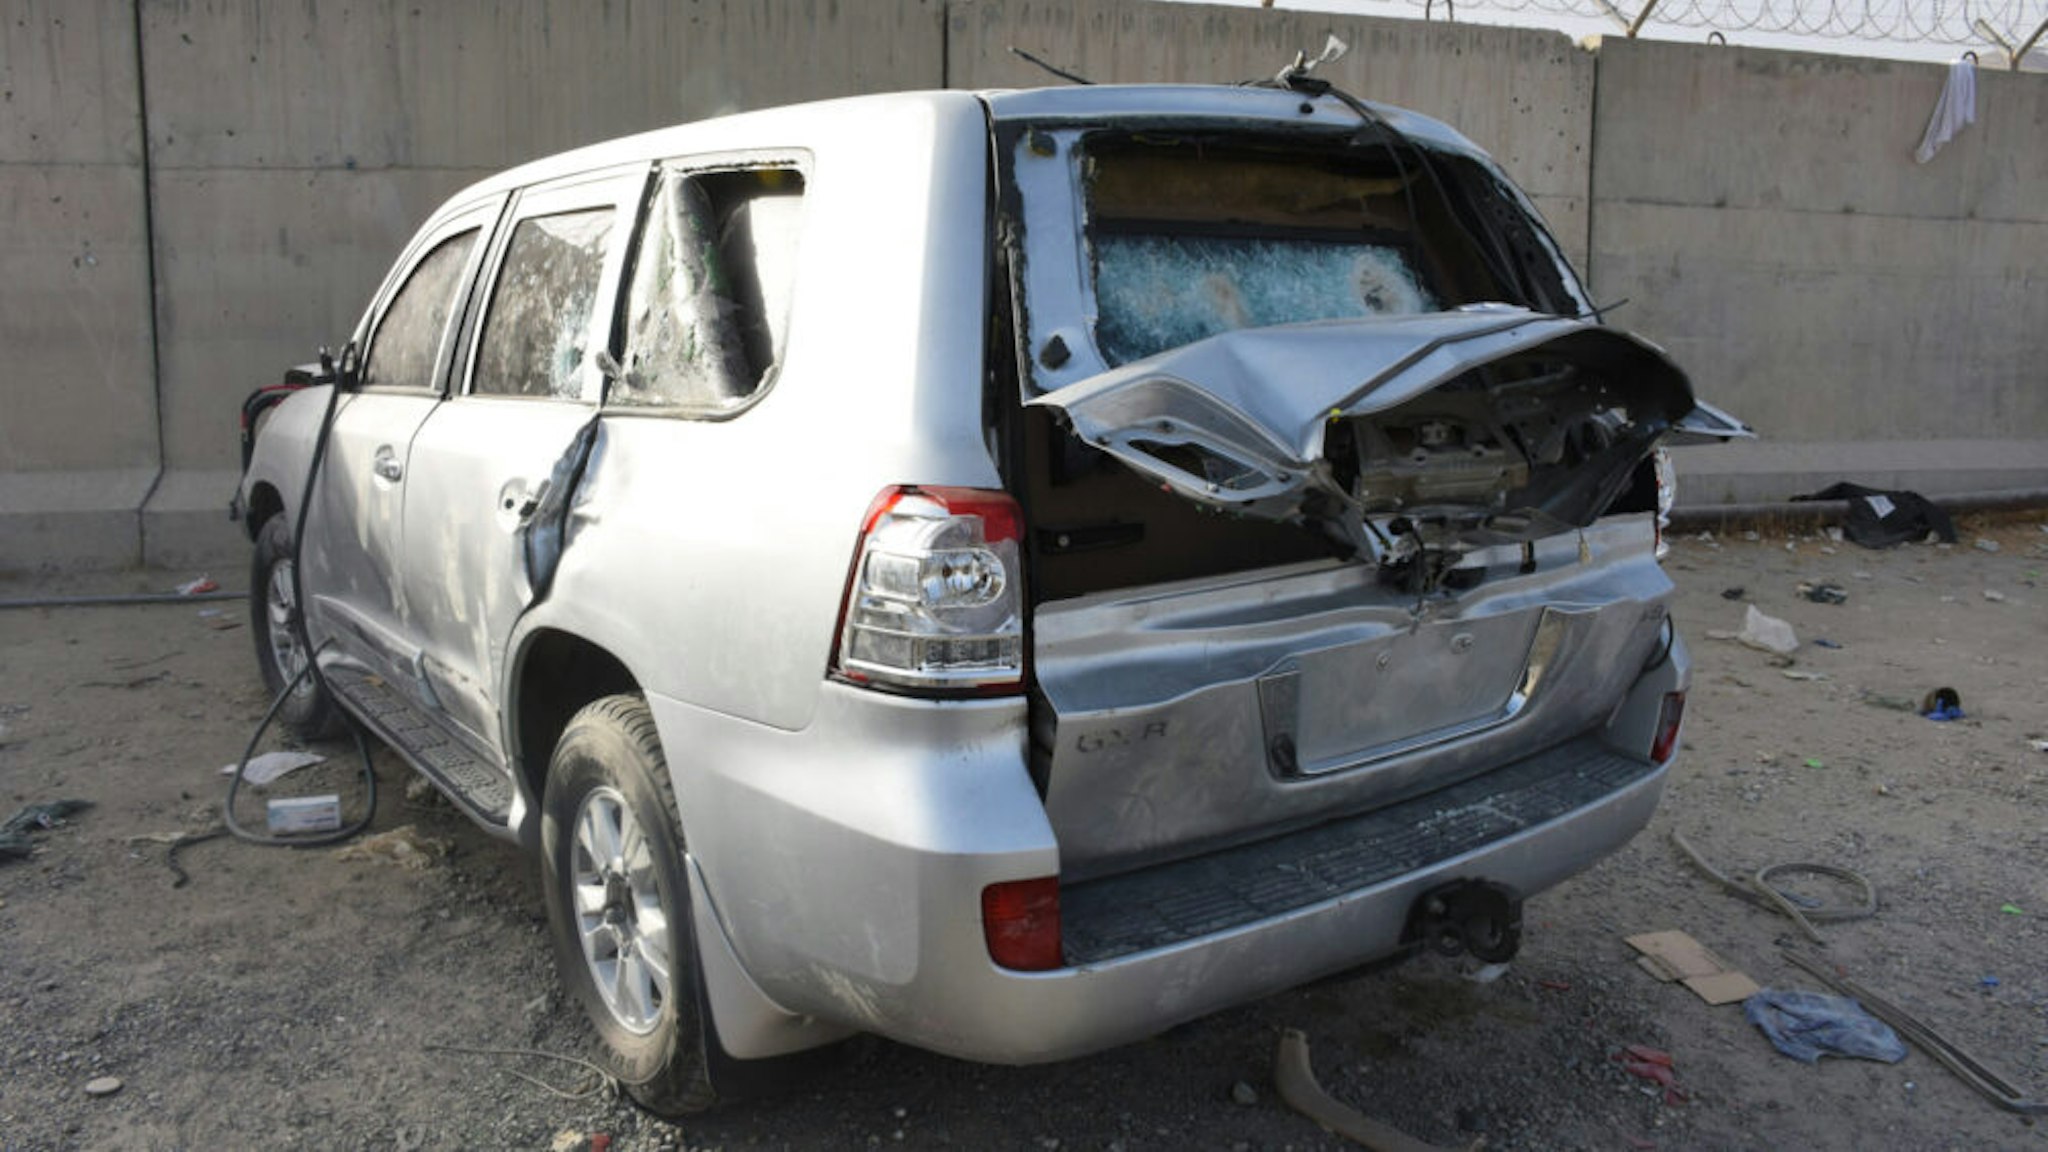 KABUL, AFGHANISTAN - AUGUST 20: Destroyed vehicles are seen at the entrance of the airport in Kabul, Afghanistan on August 20, 2021. People who wanted to leave the country had to leave their vehicles at the international airport checkpoint. Vehicles damaged by those who could not enter the airport with the hope of evacuation turned into a car junkyard.